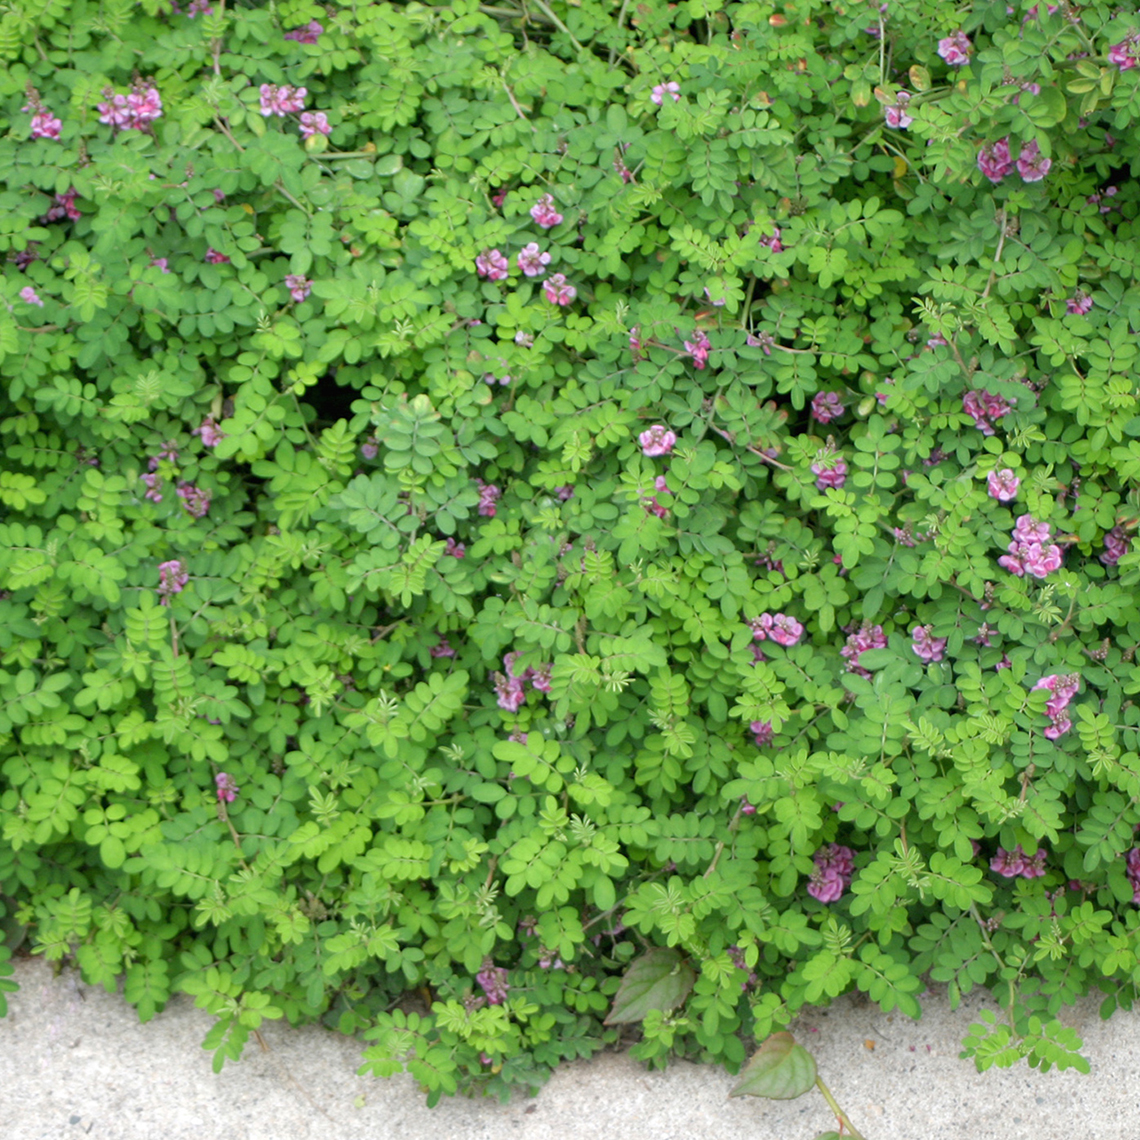 Ground covering Indigofera Rose Carpet with pink flowers